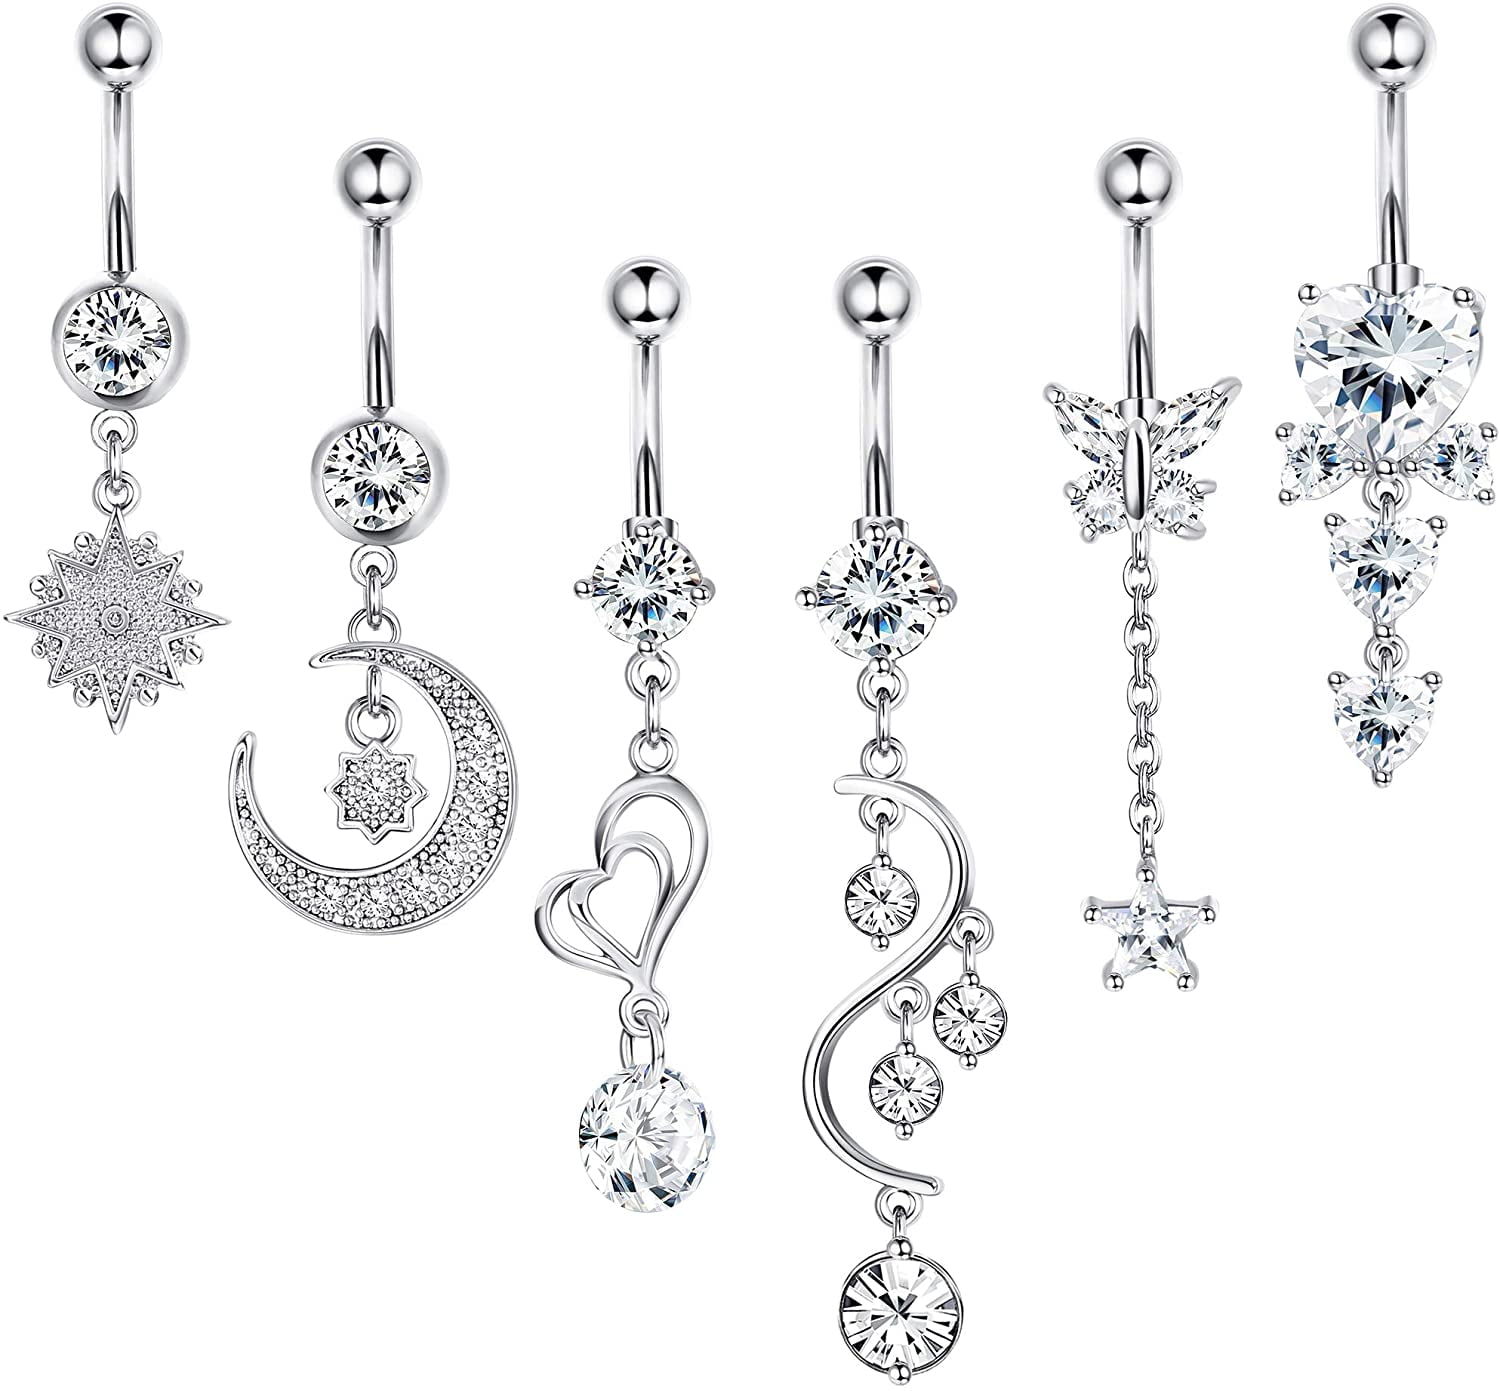 5 Logo Steel Ball 14g Belly Button Rings WHOLESALE Navel Naval Body Jewelry 